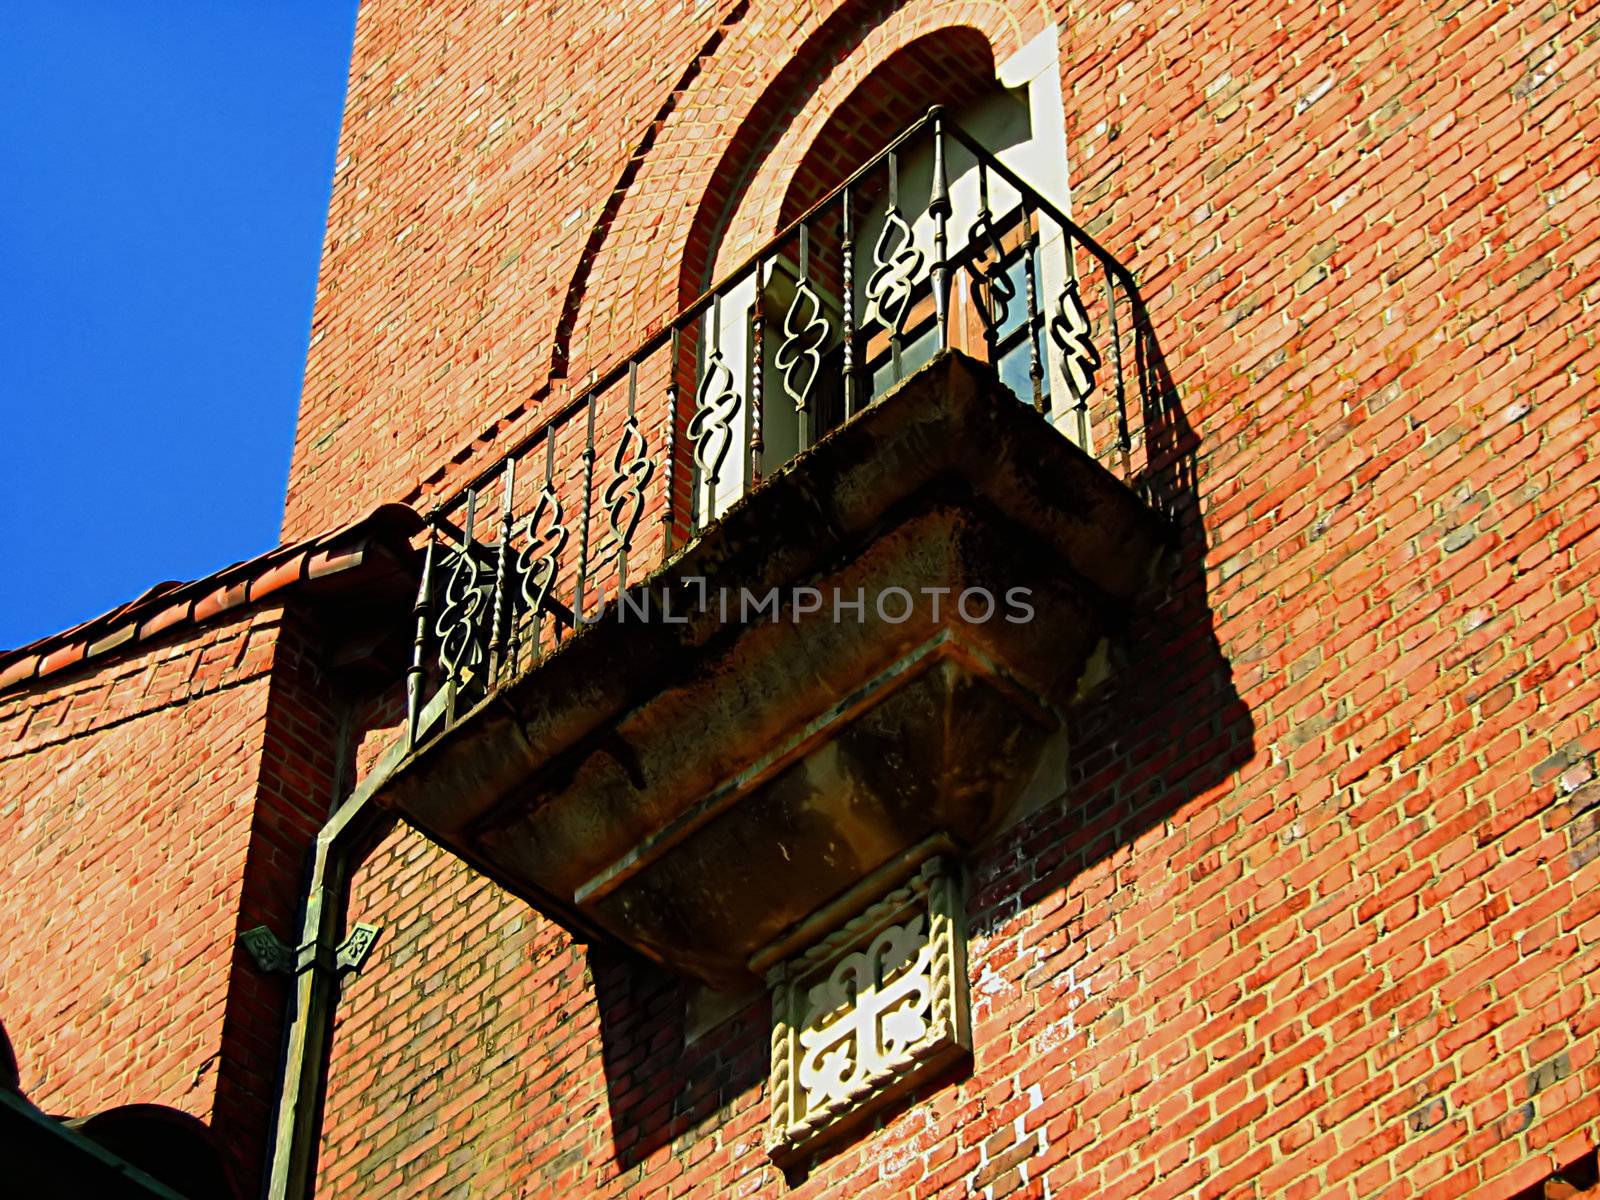 A photograph of a balcony and window detailing their beautiful architectural design.